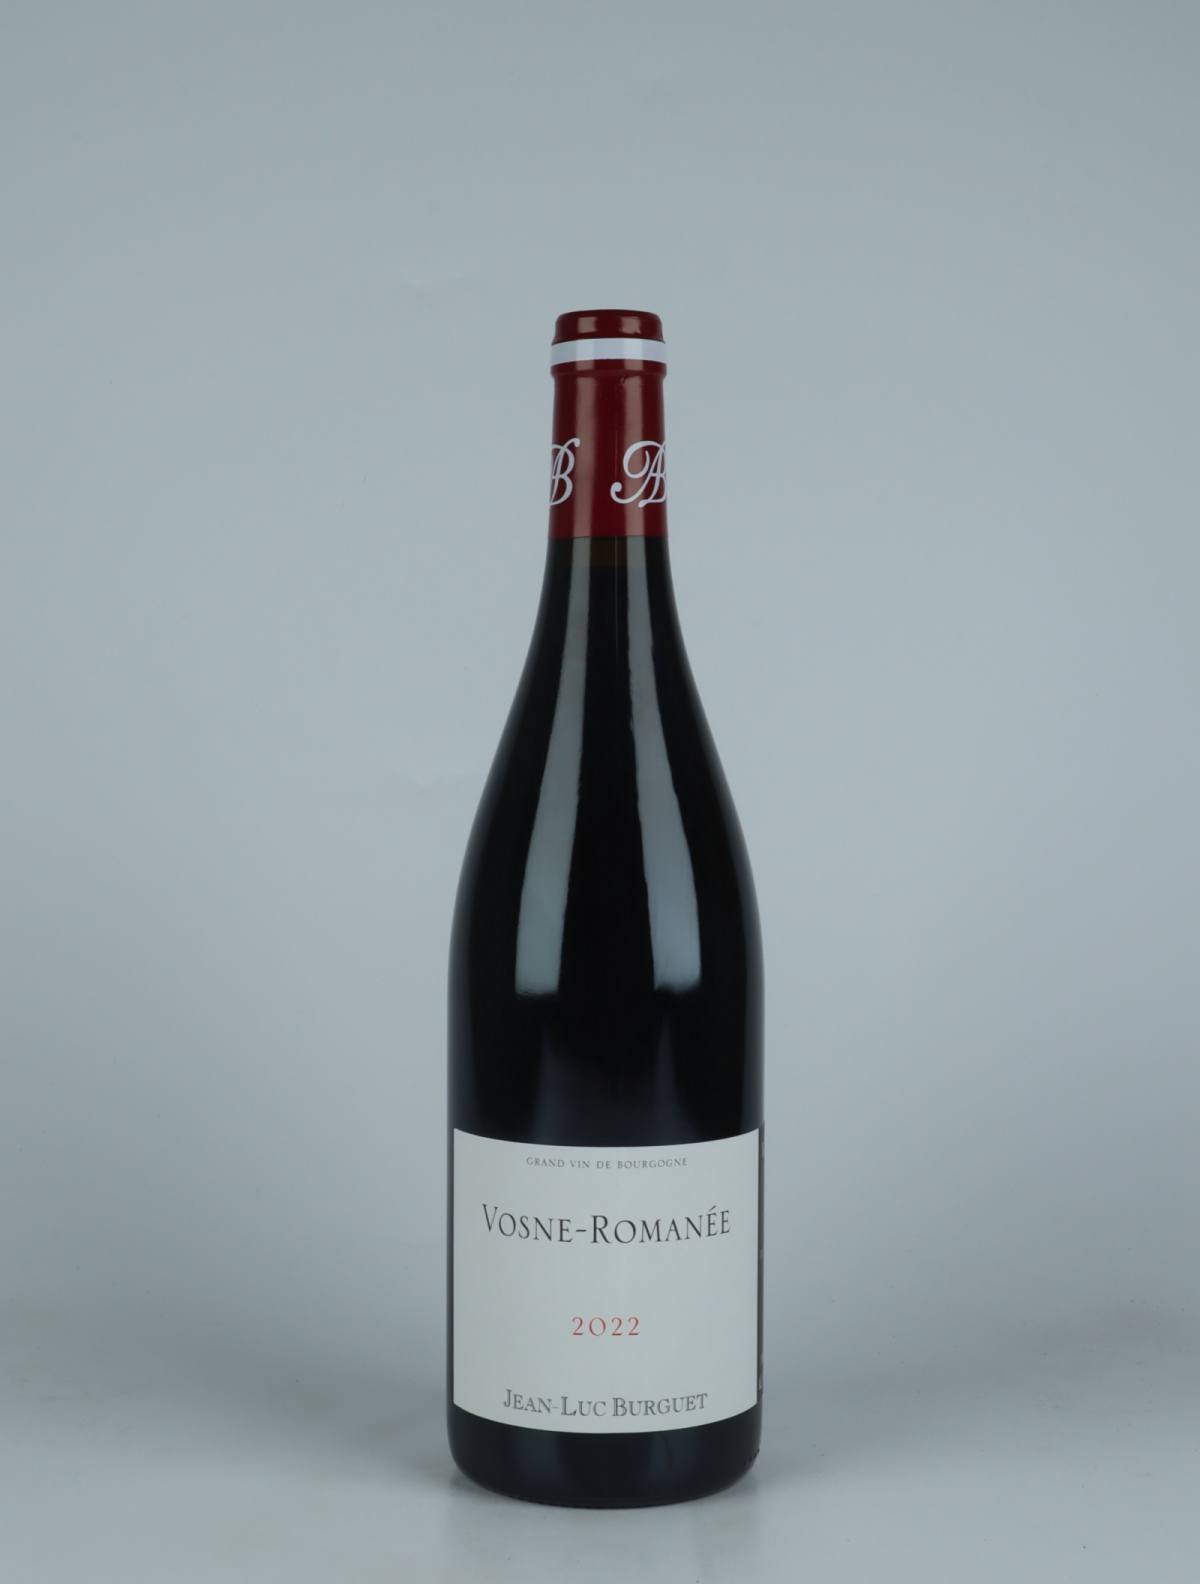 A bottle 2022 Vosne-Romanée Red wine from Jean-Luc & Eric Burguet, Burgundy in France